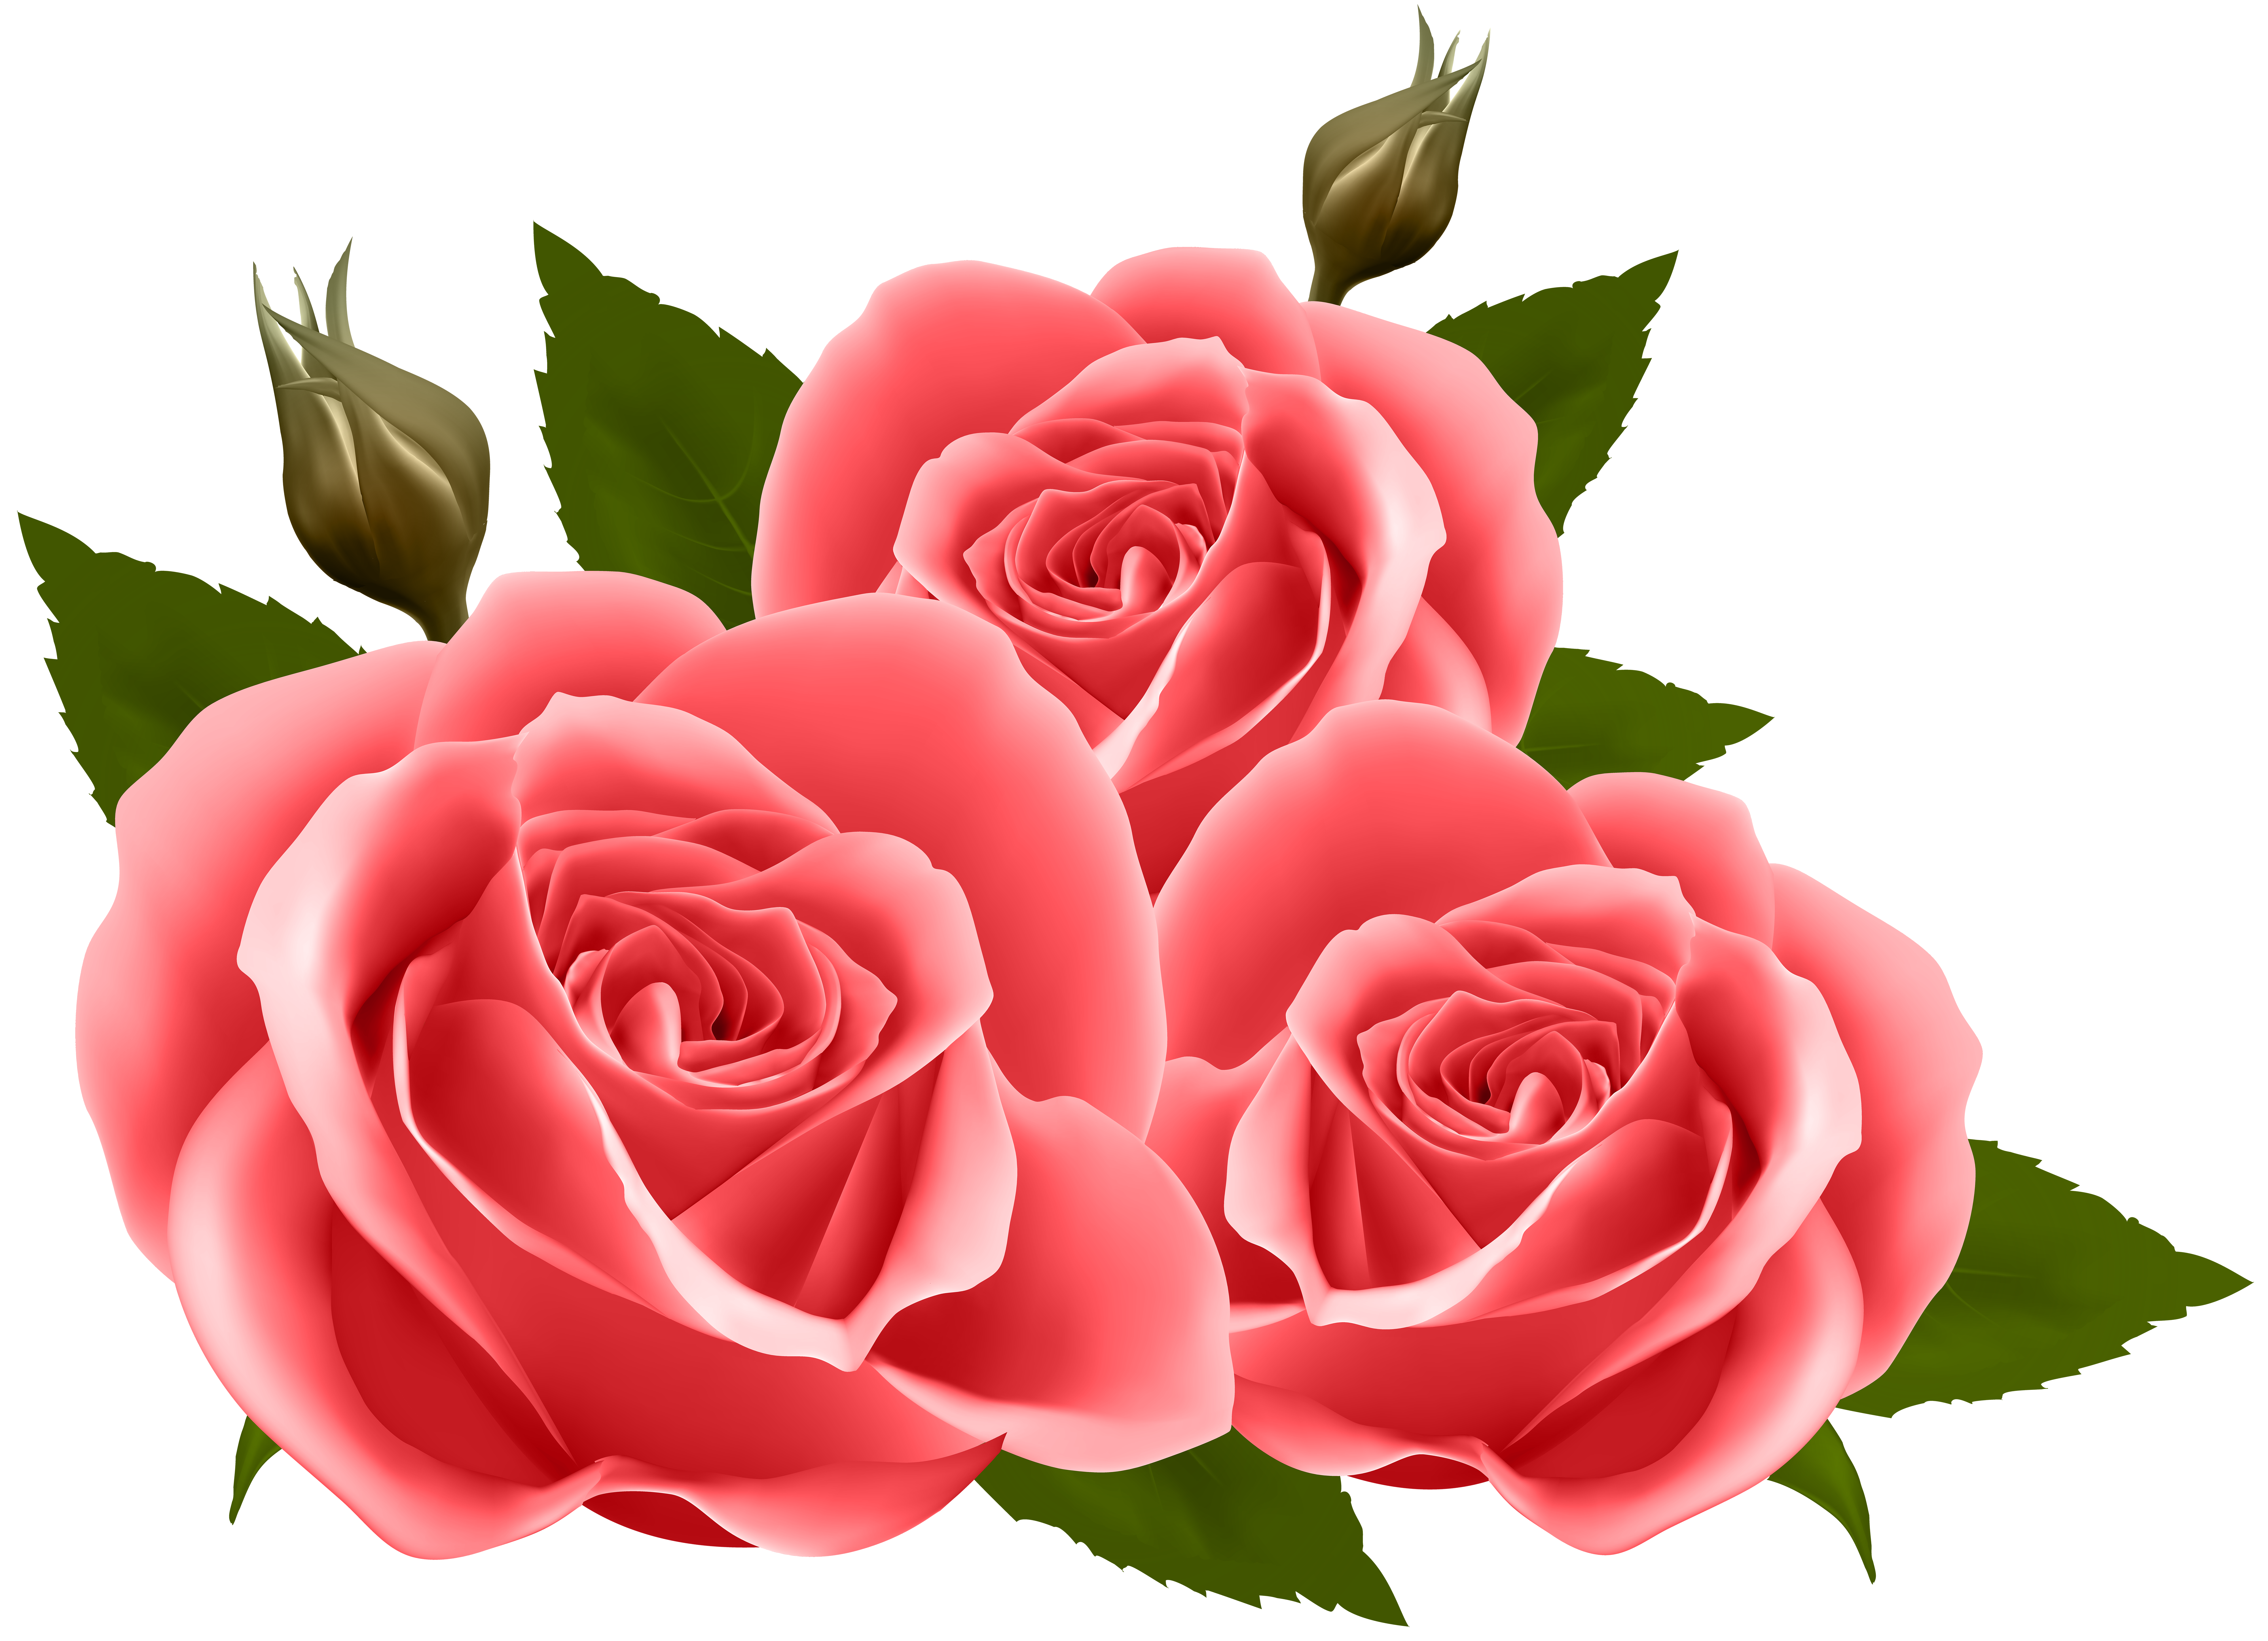 Red Roses PNG Clip Art Image.